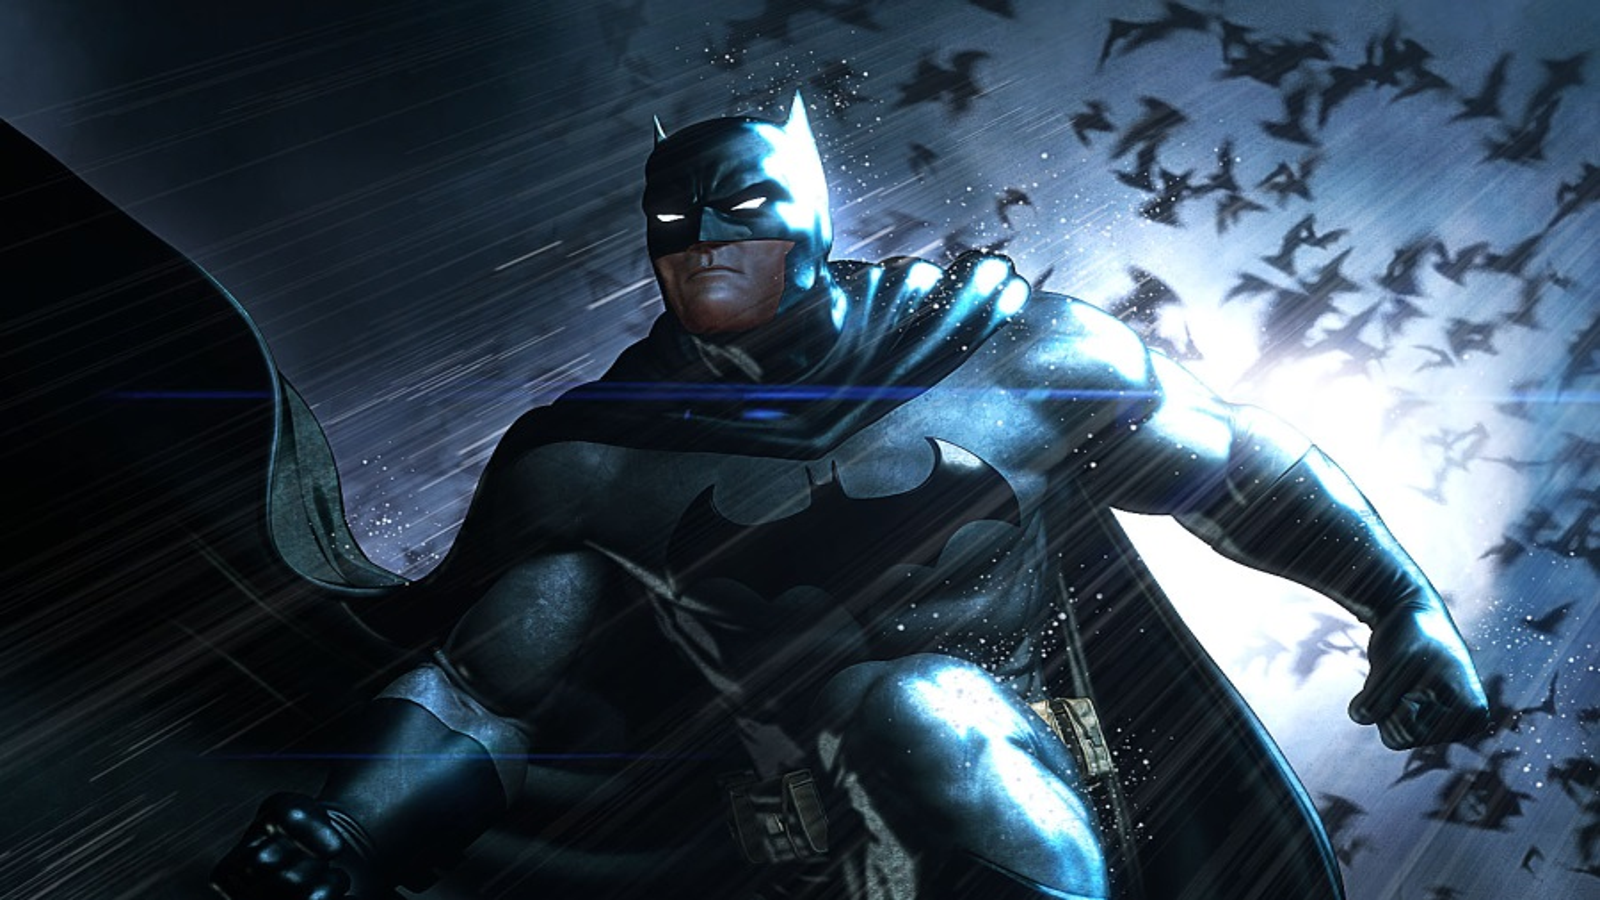 Celebrate 75 years of Batman with Jim Lee and DCUO | VG247